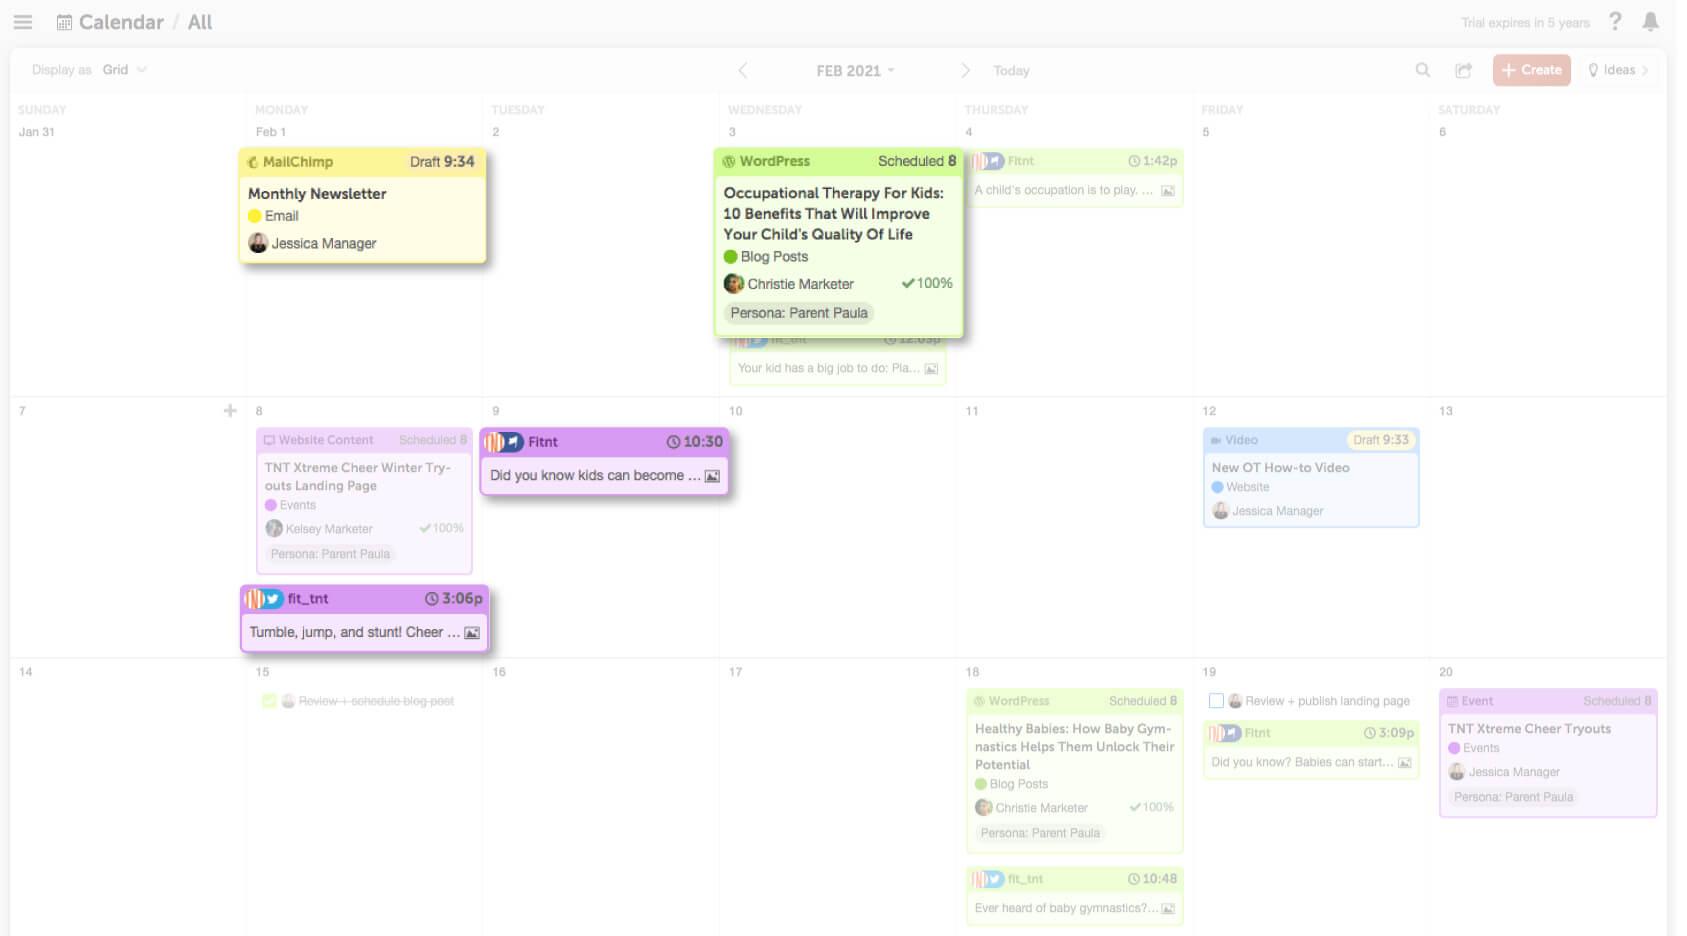 Schedule Projects the day they'll publish